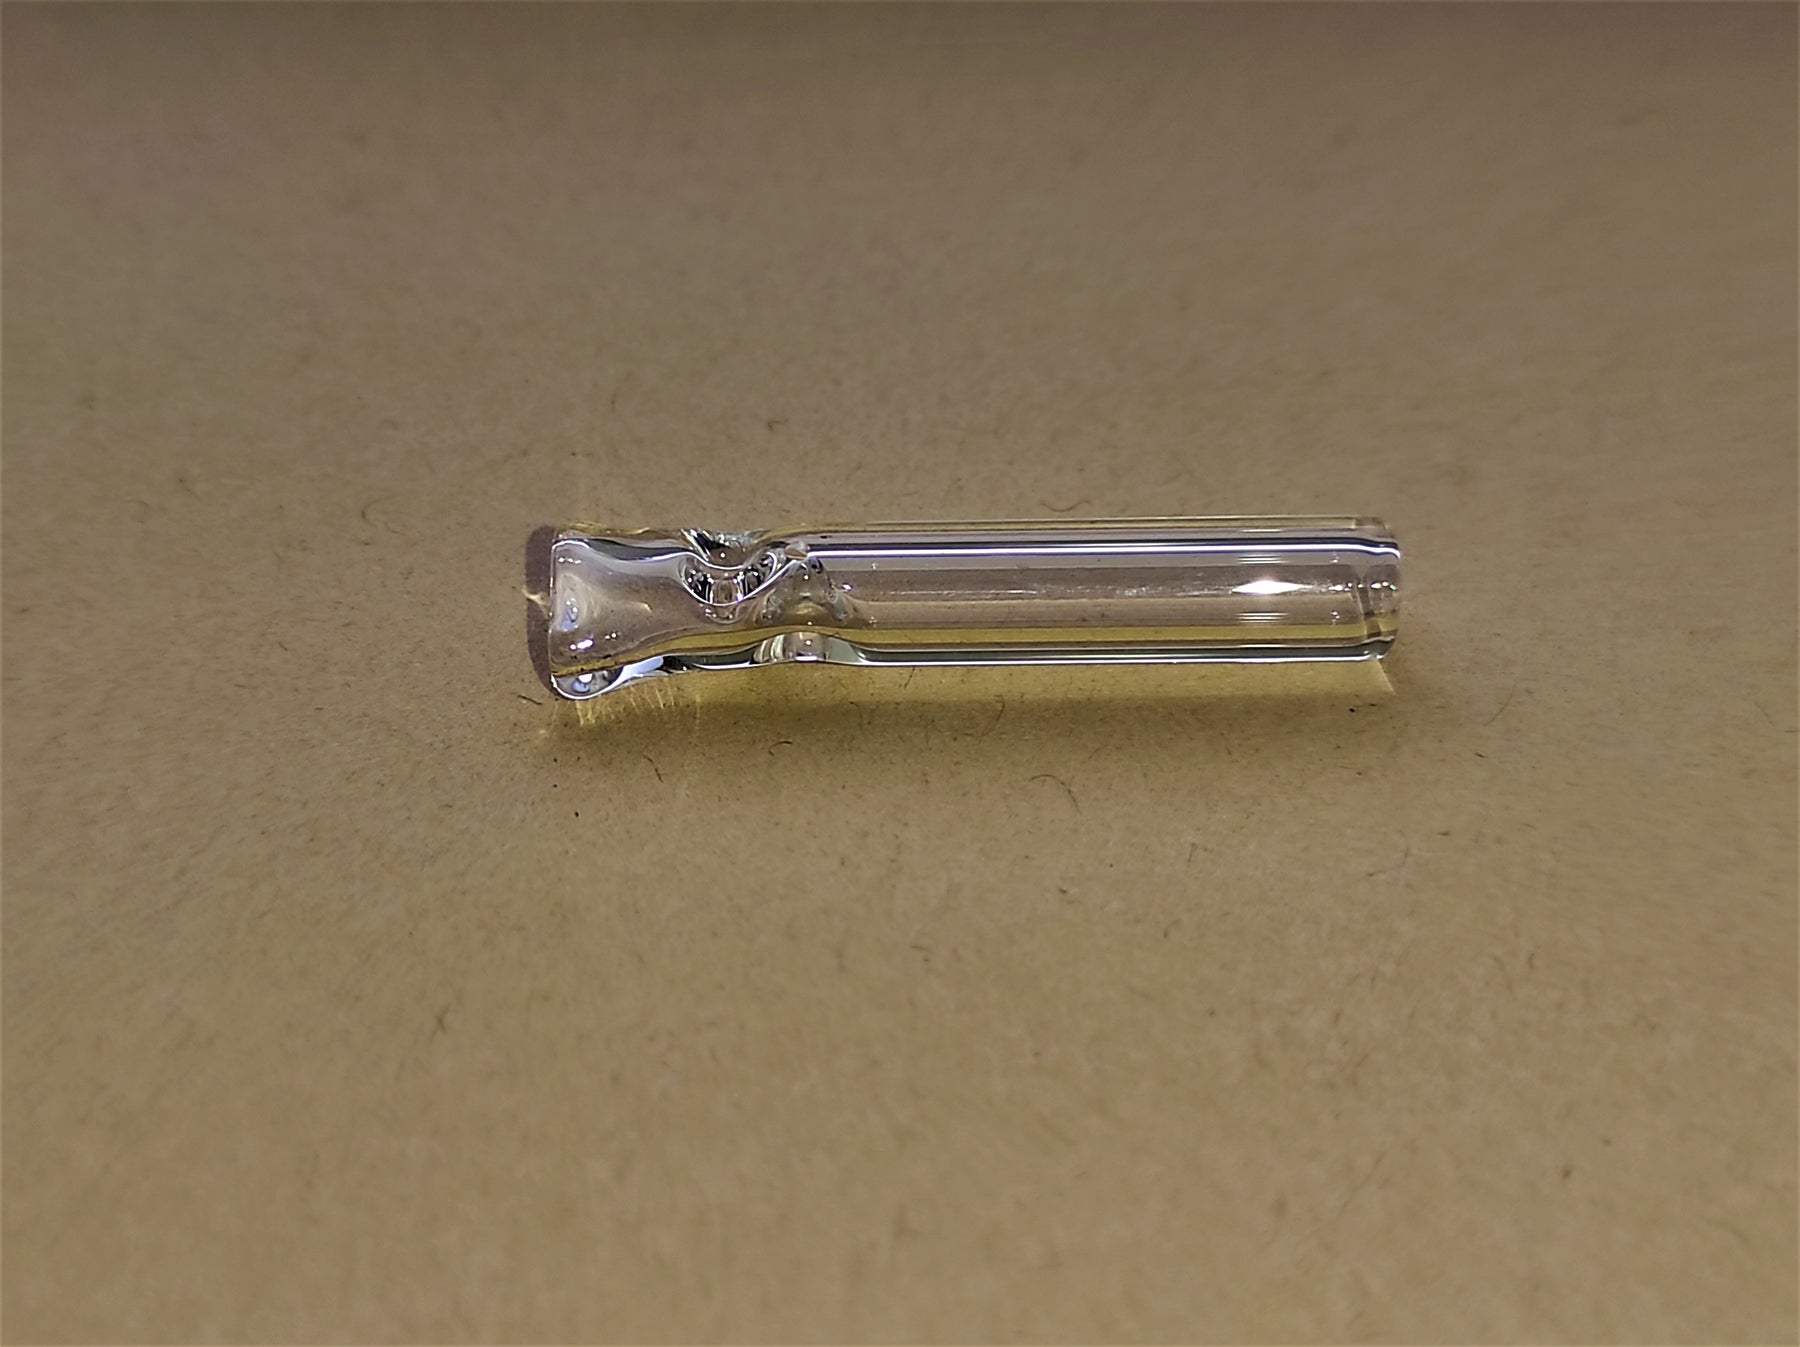 OutonTrip Re-useable Glass Filter Tip - Flat Mouthpiece